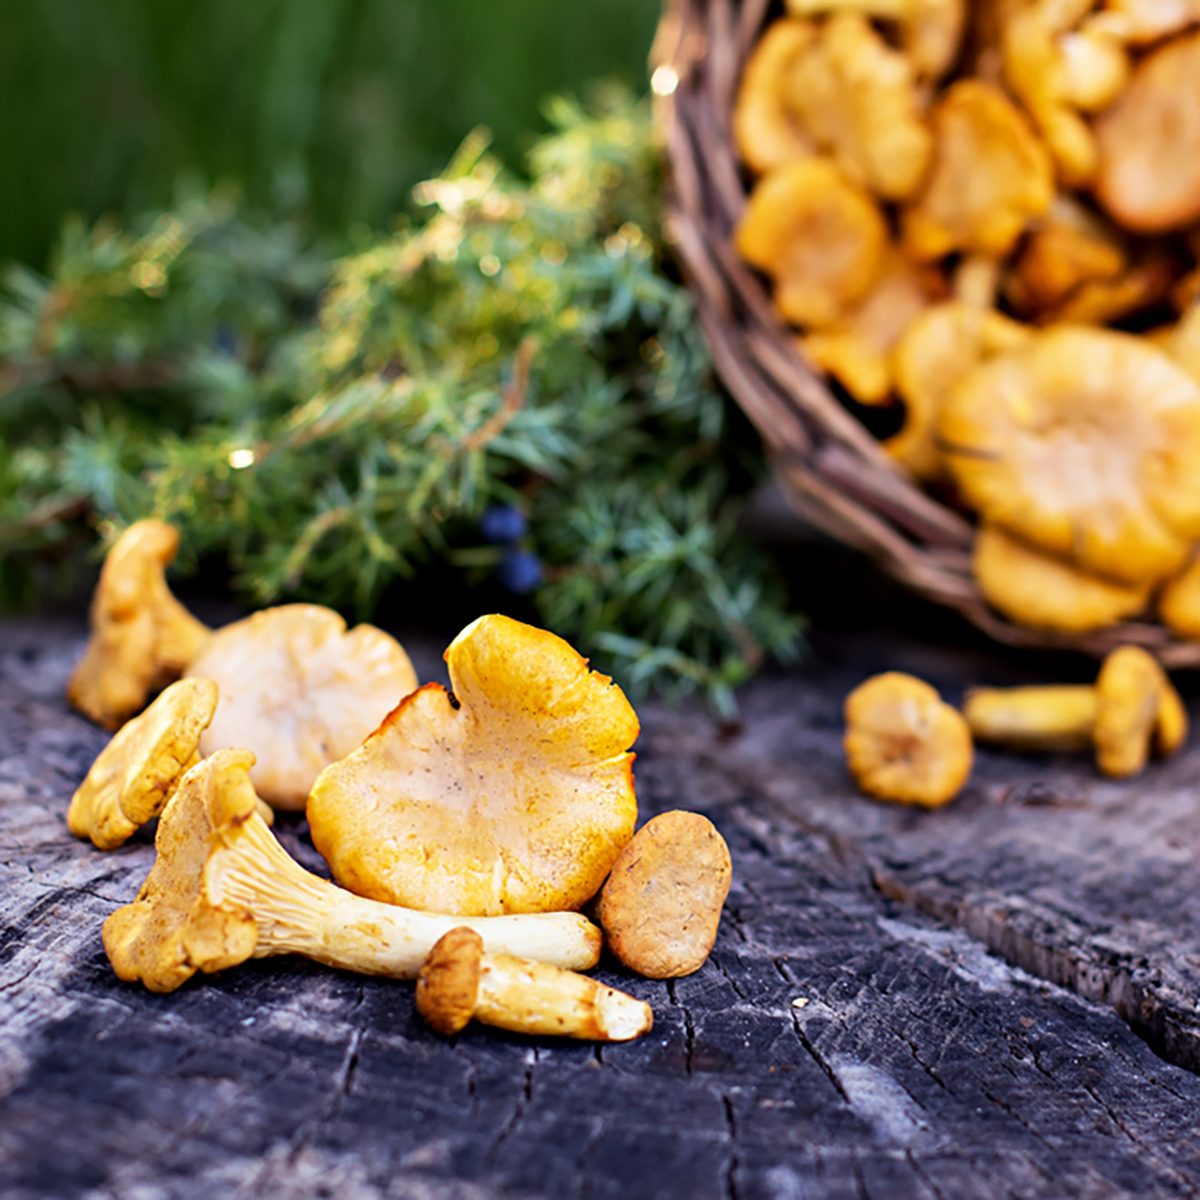 Mushrooms chanterelle in the basket. Raw wild mushrooms chanterelles in basket with dill on wooden background. Composition with wild mushrooms;